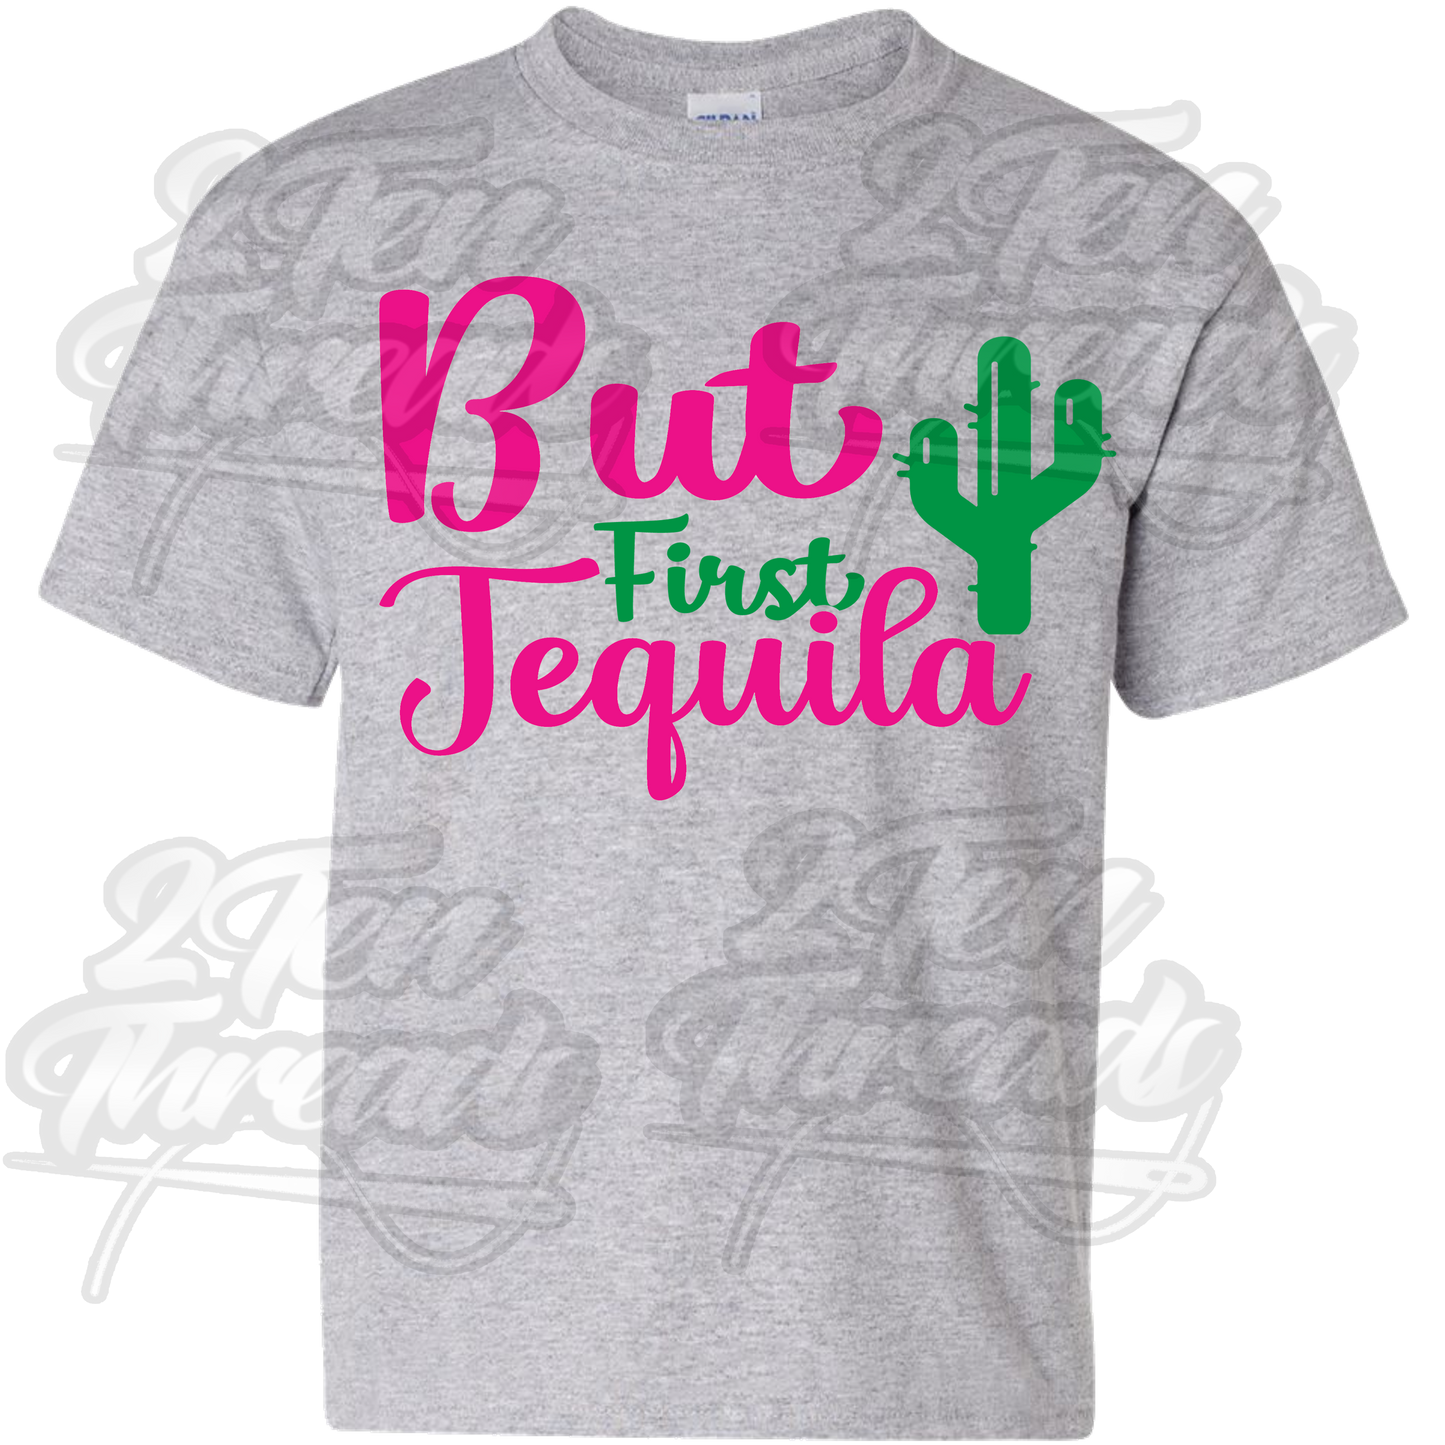 Tequila first